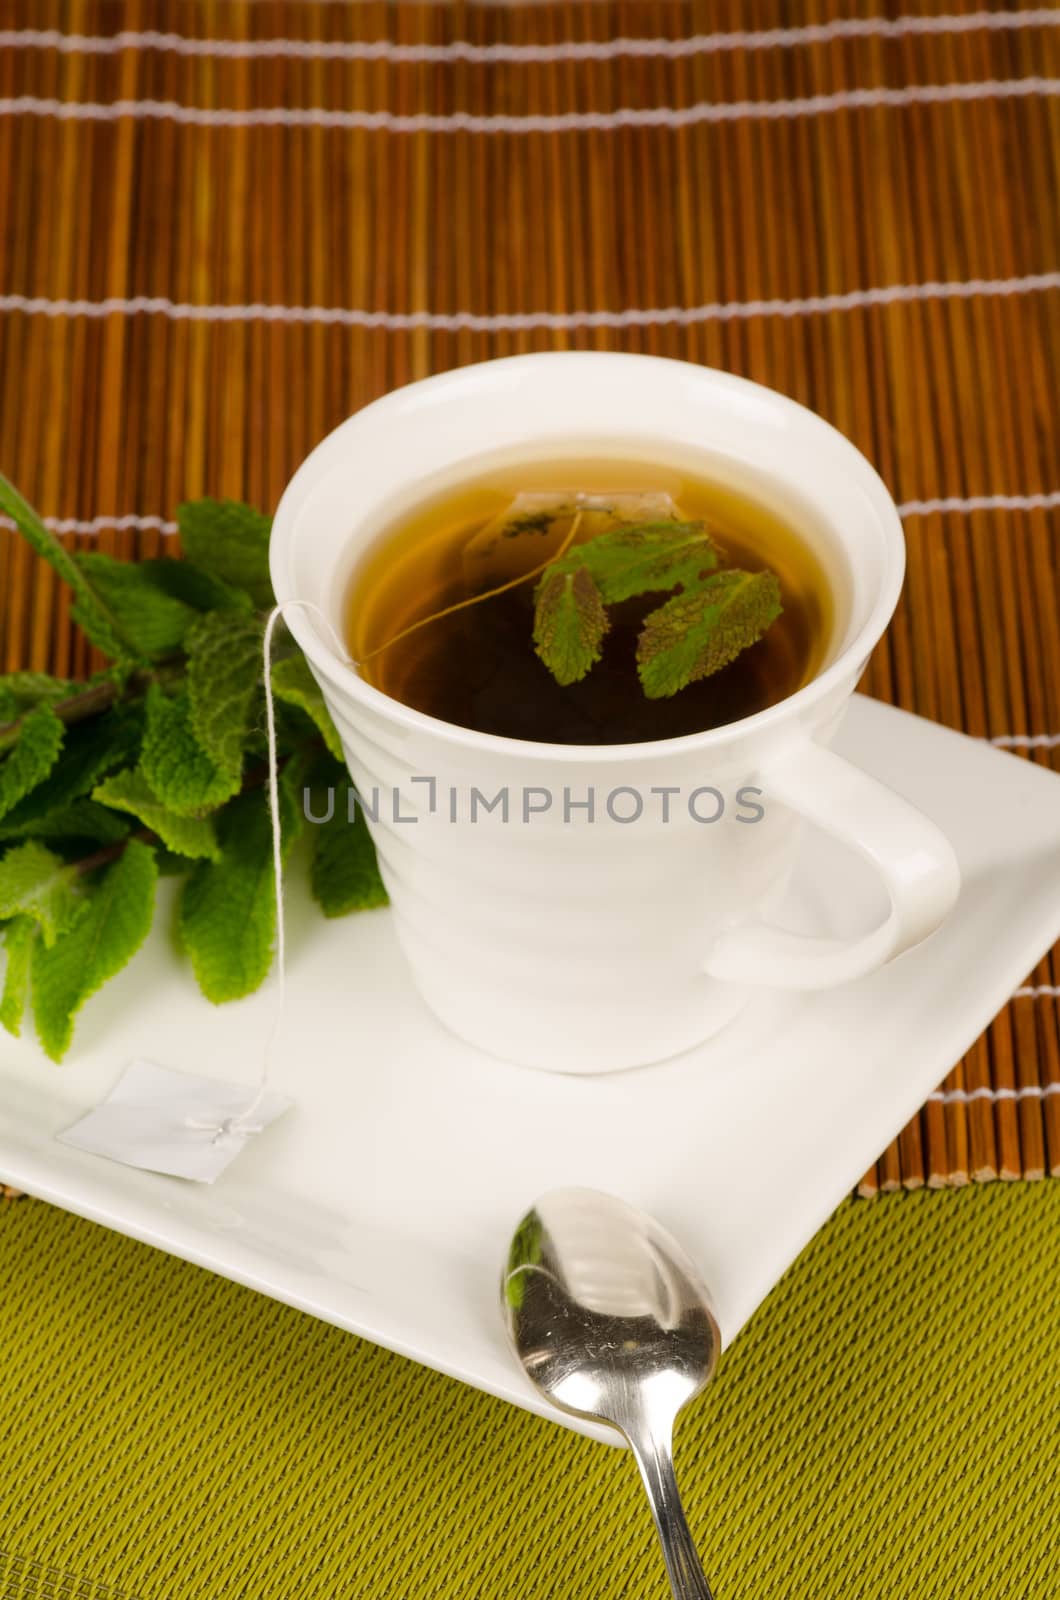 Green tea enhanced with aromatic mint leaves